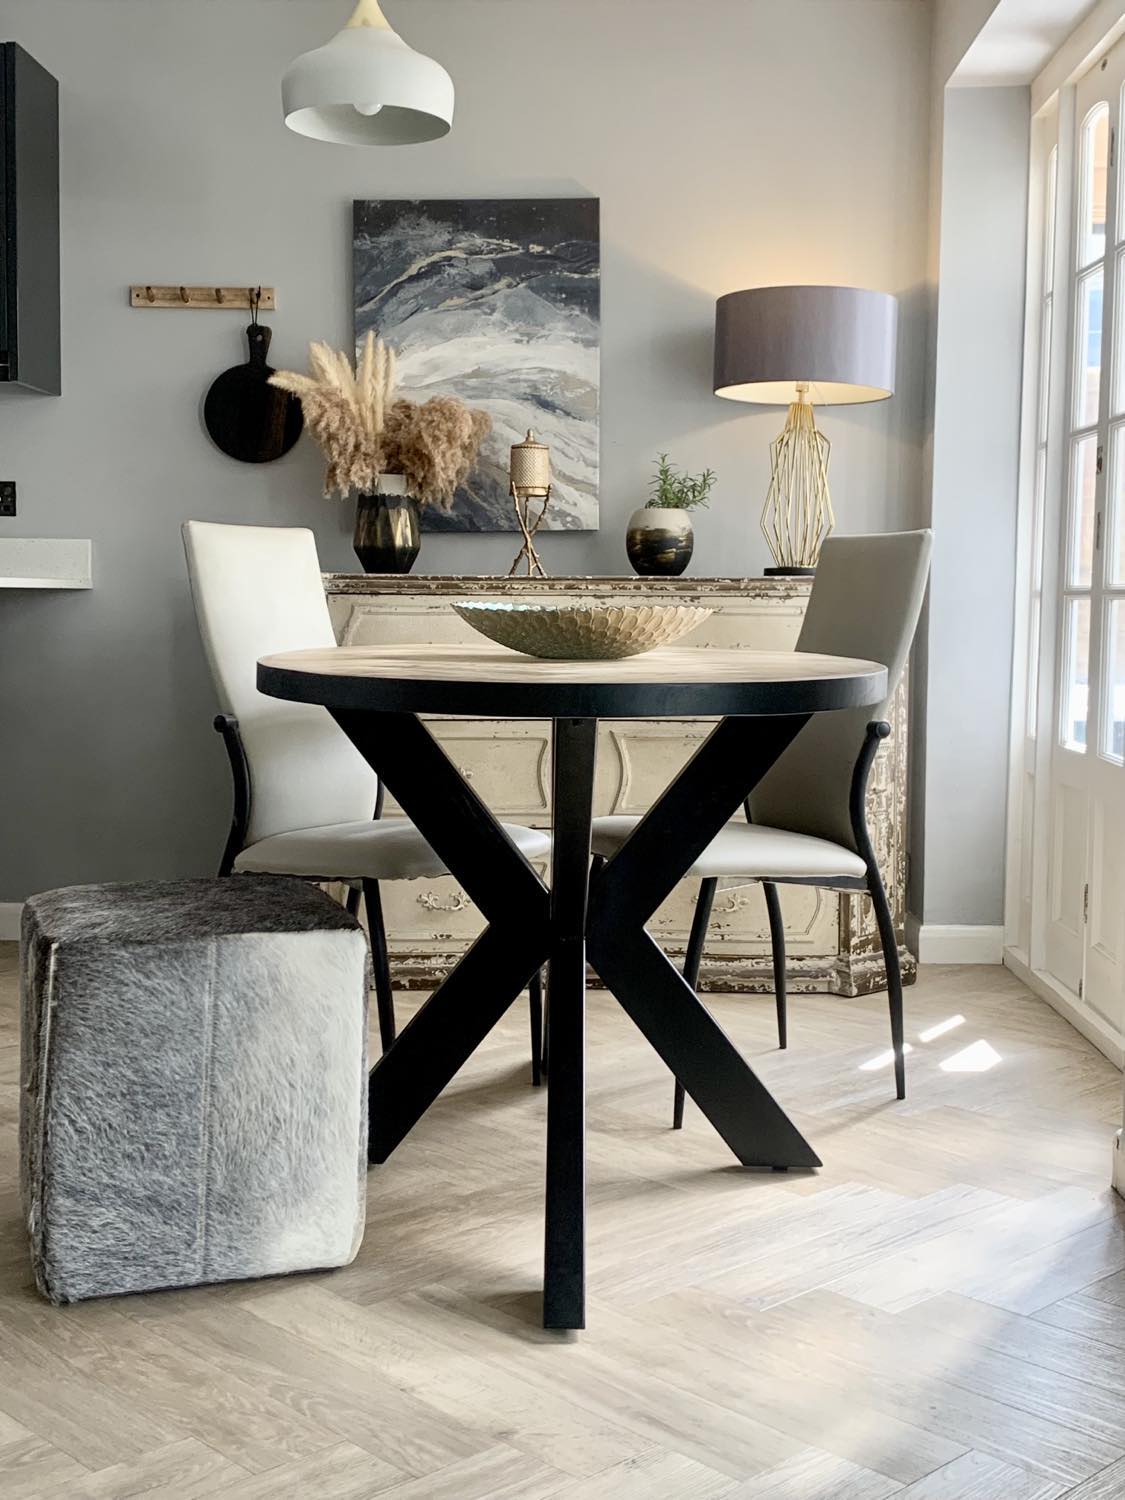 Oval Solid Wood Herringbone Dining Table | Black Iron Spider Base - 160cms Casa Maria Designs 